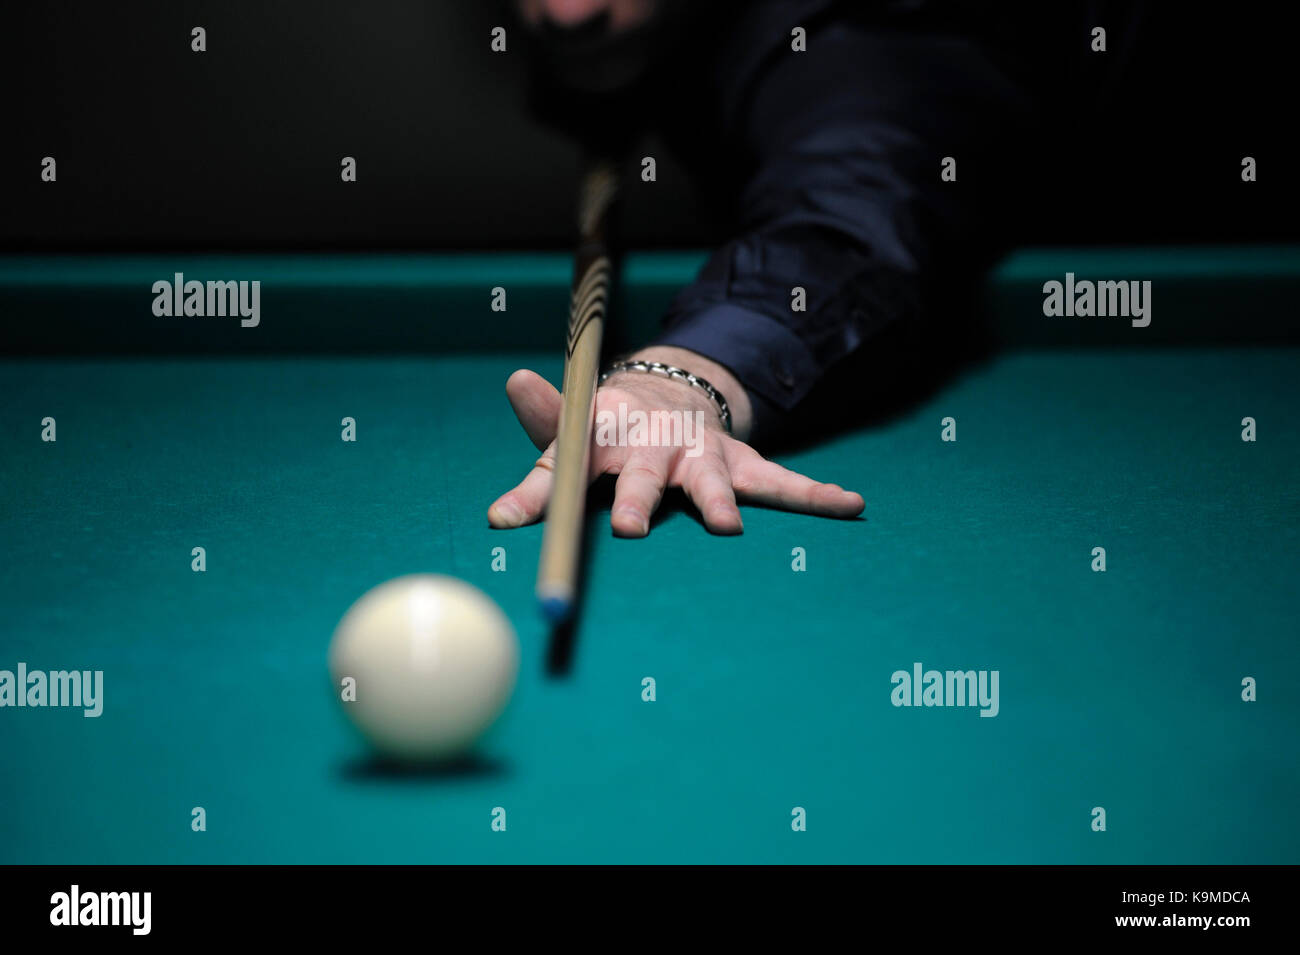 A player's arm with a cue on a pool table ready to stroke a ball Stock Photo